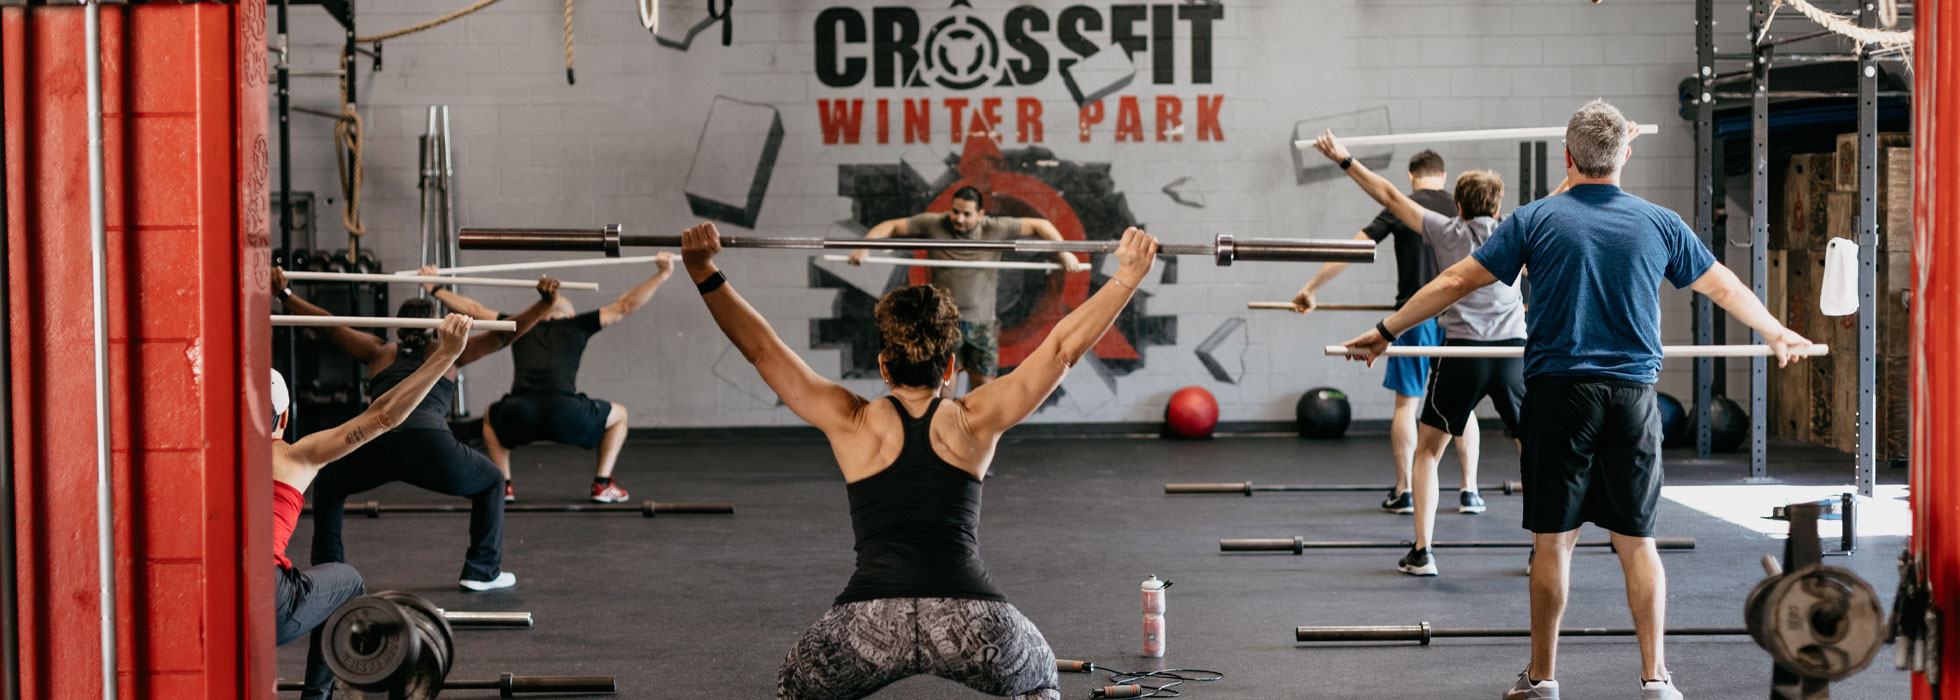 11Top 5 Best Gyms To Join Near Me In Winter Park, Florida